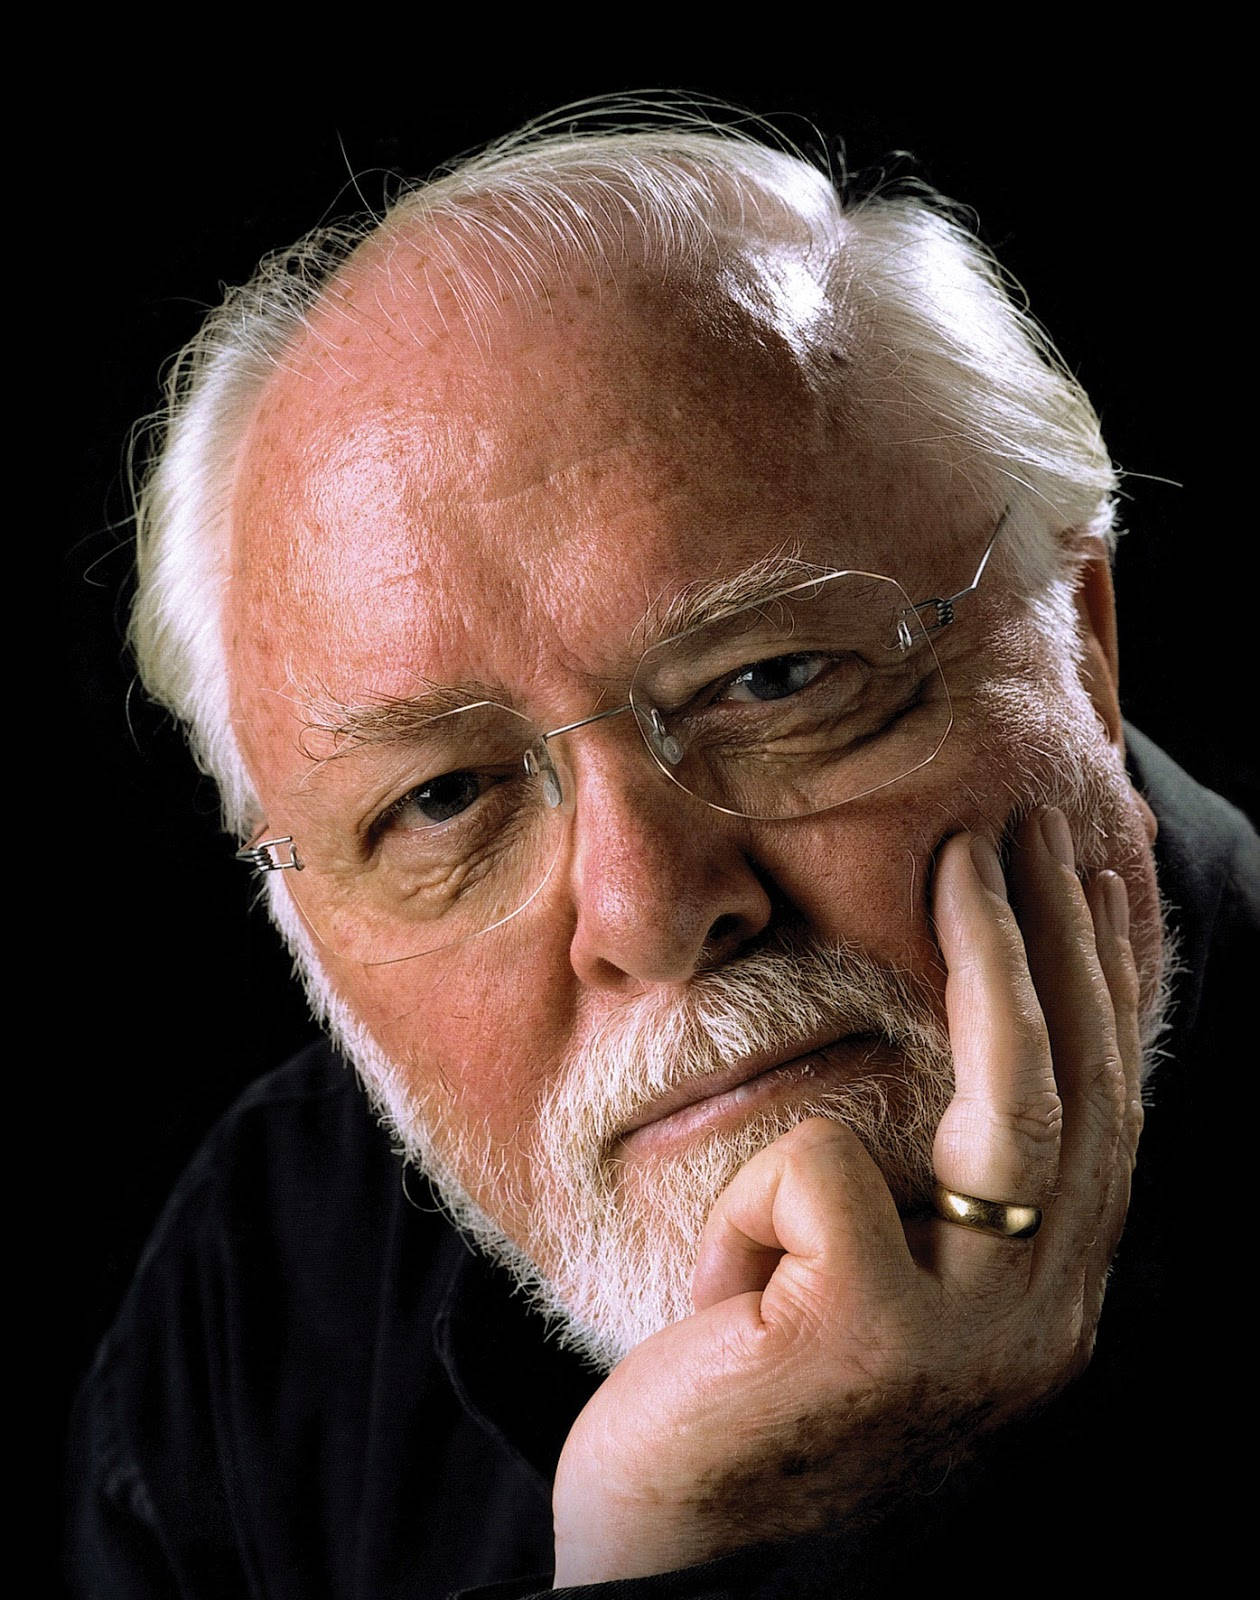 Reflective moment of Acclaimed Director, Richard Attenborough Wallpaper